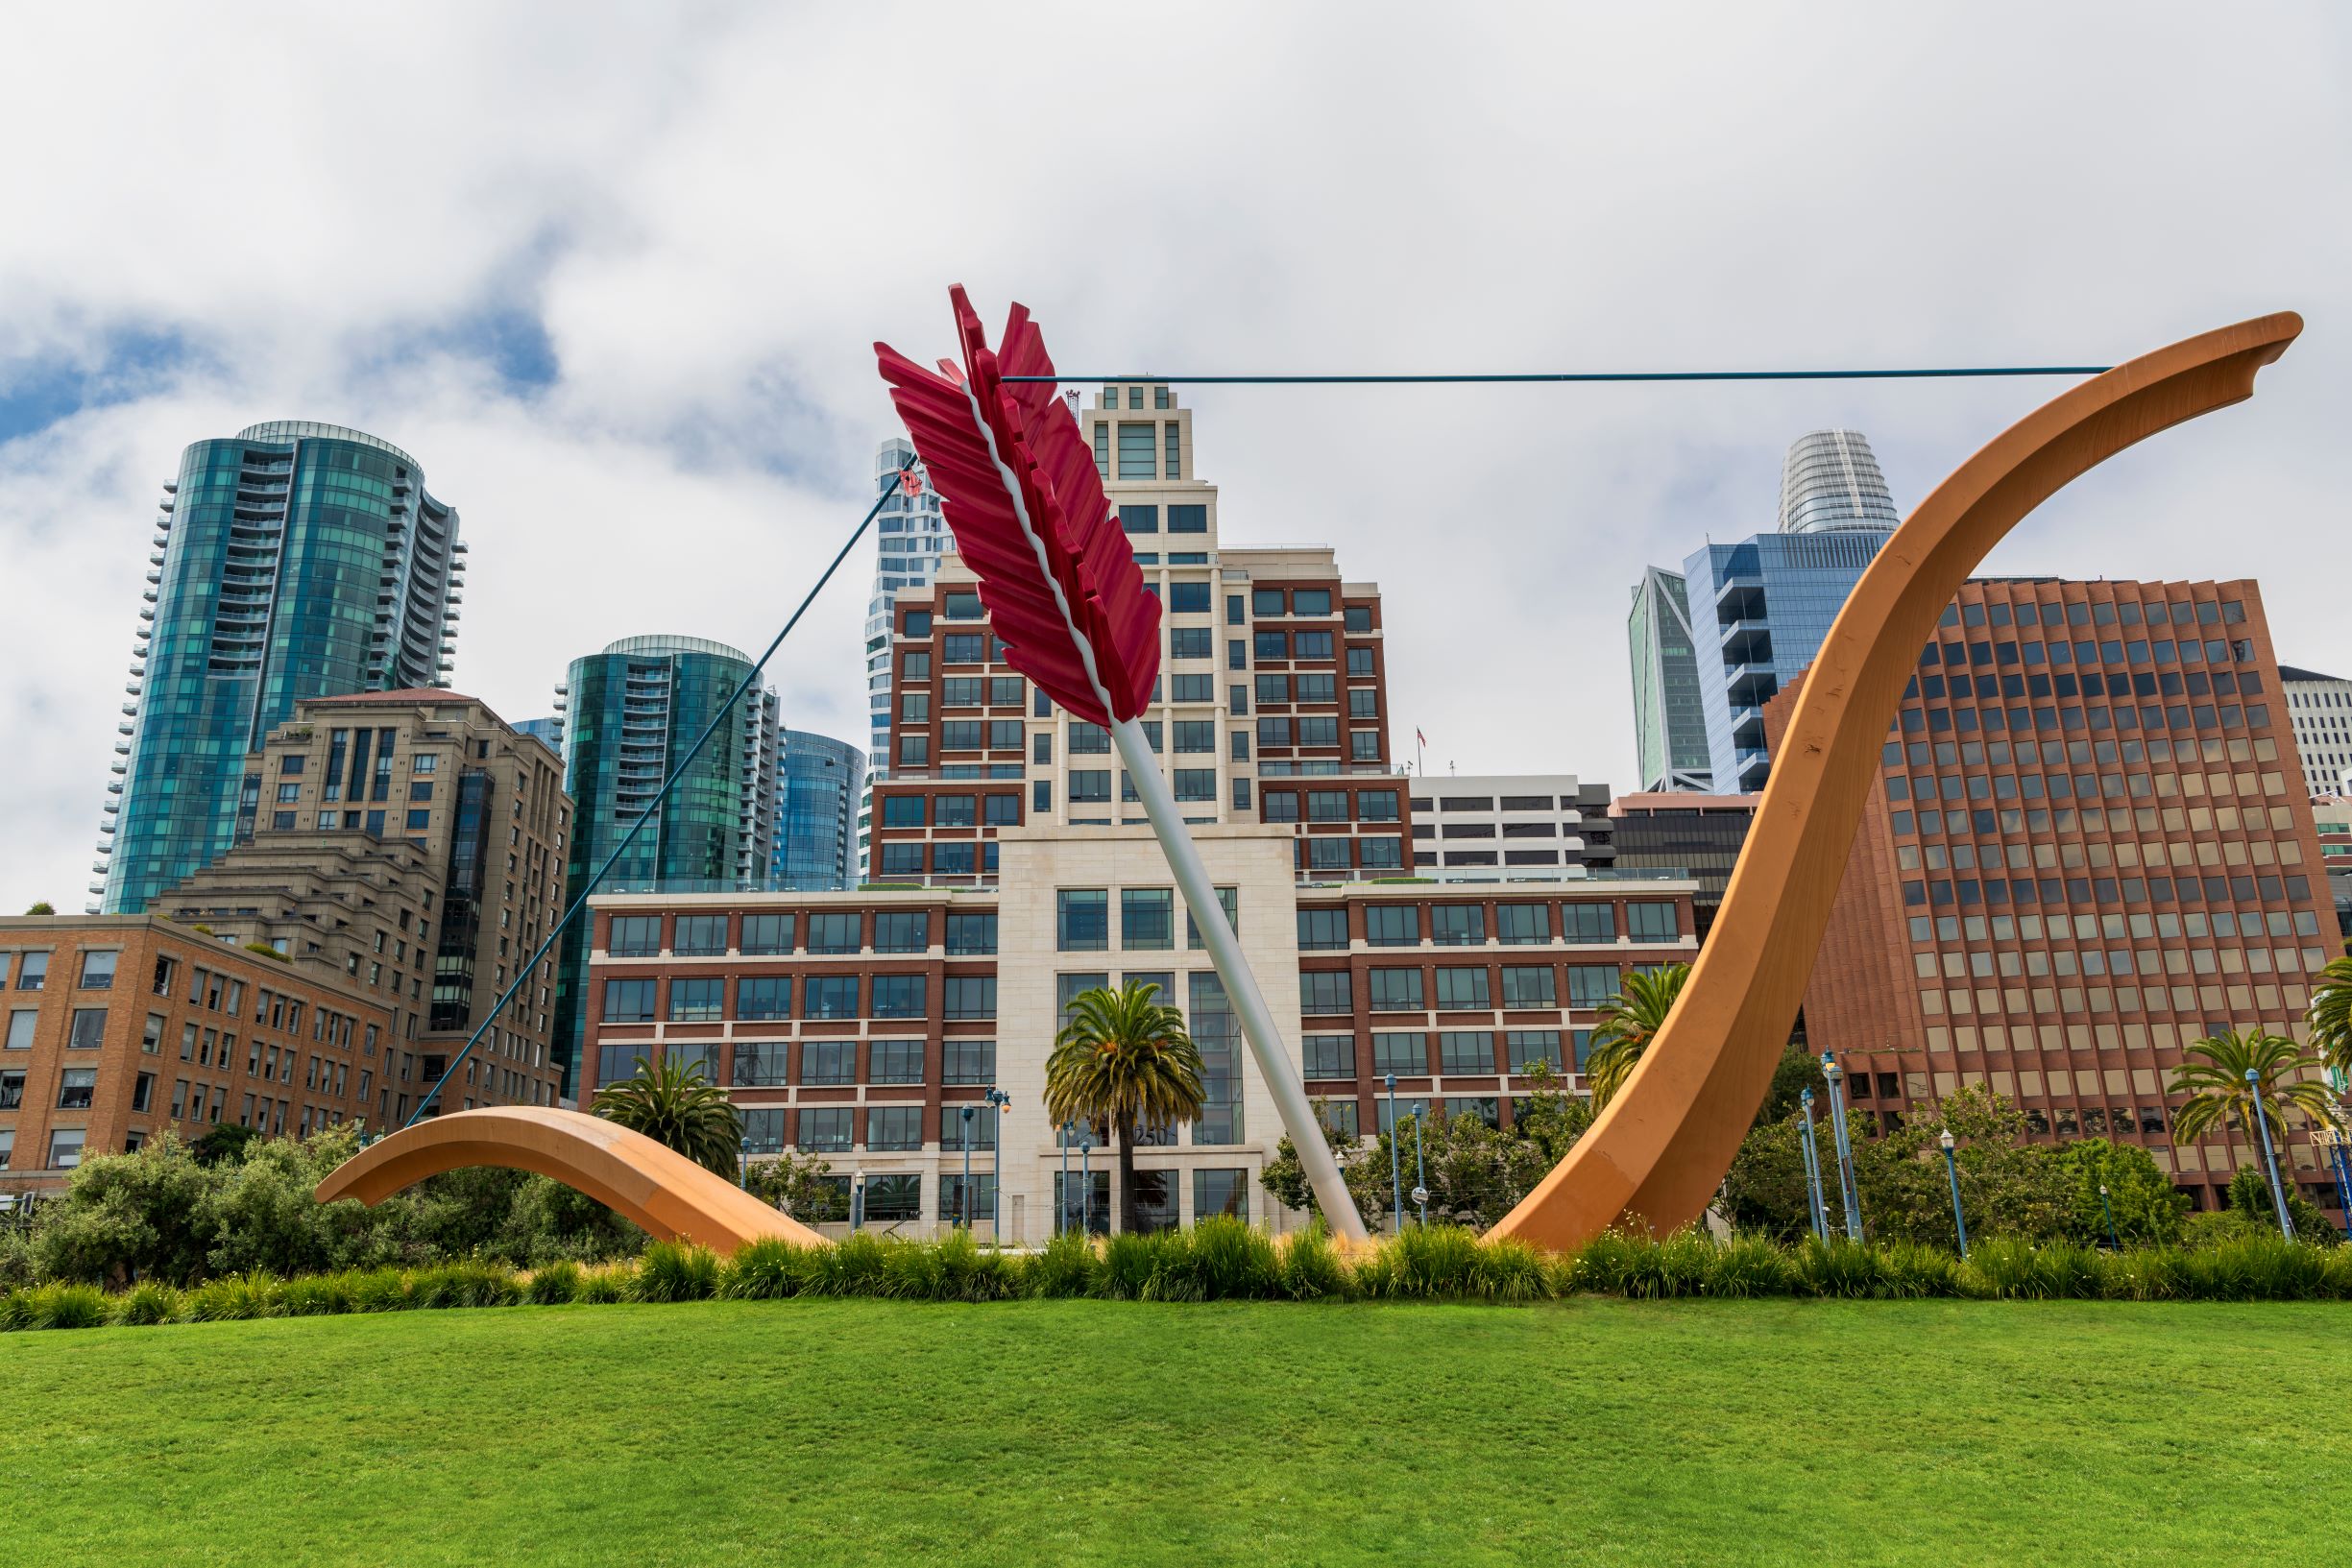 Photo of Cupid's Span in San Francisco's Financial District, the best place to stay in San Francisco for luxury hotels. Photo shows a large bow and arrow sculpture with the city skyline behind it. 